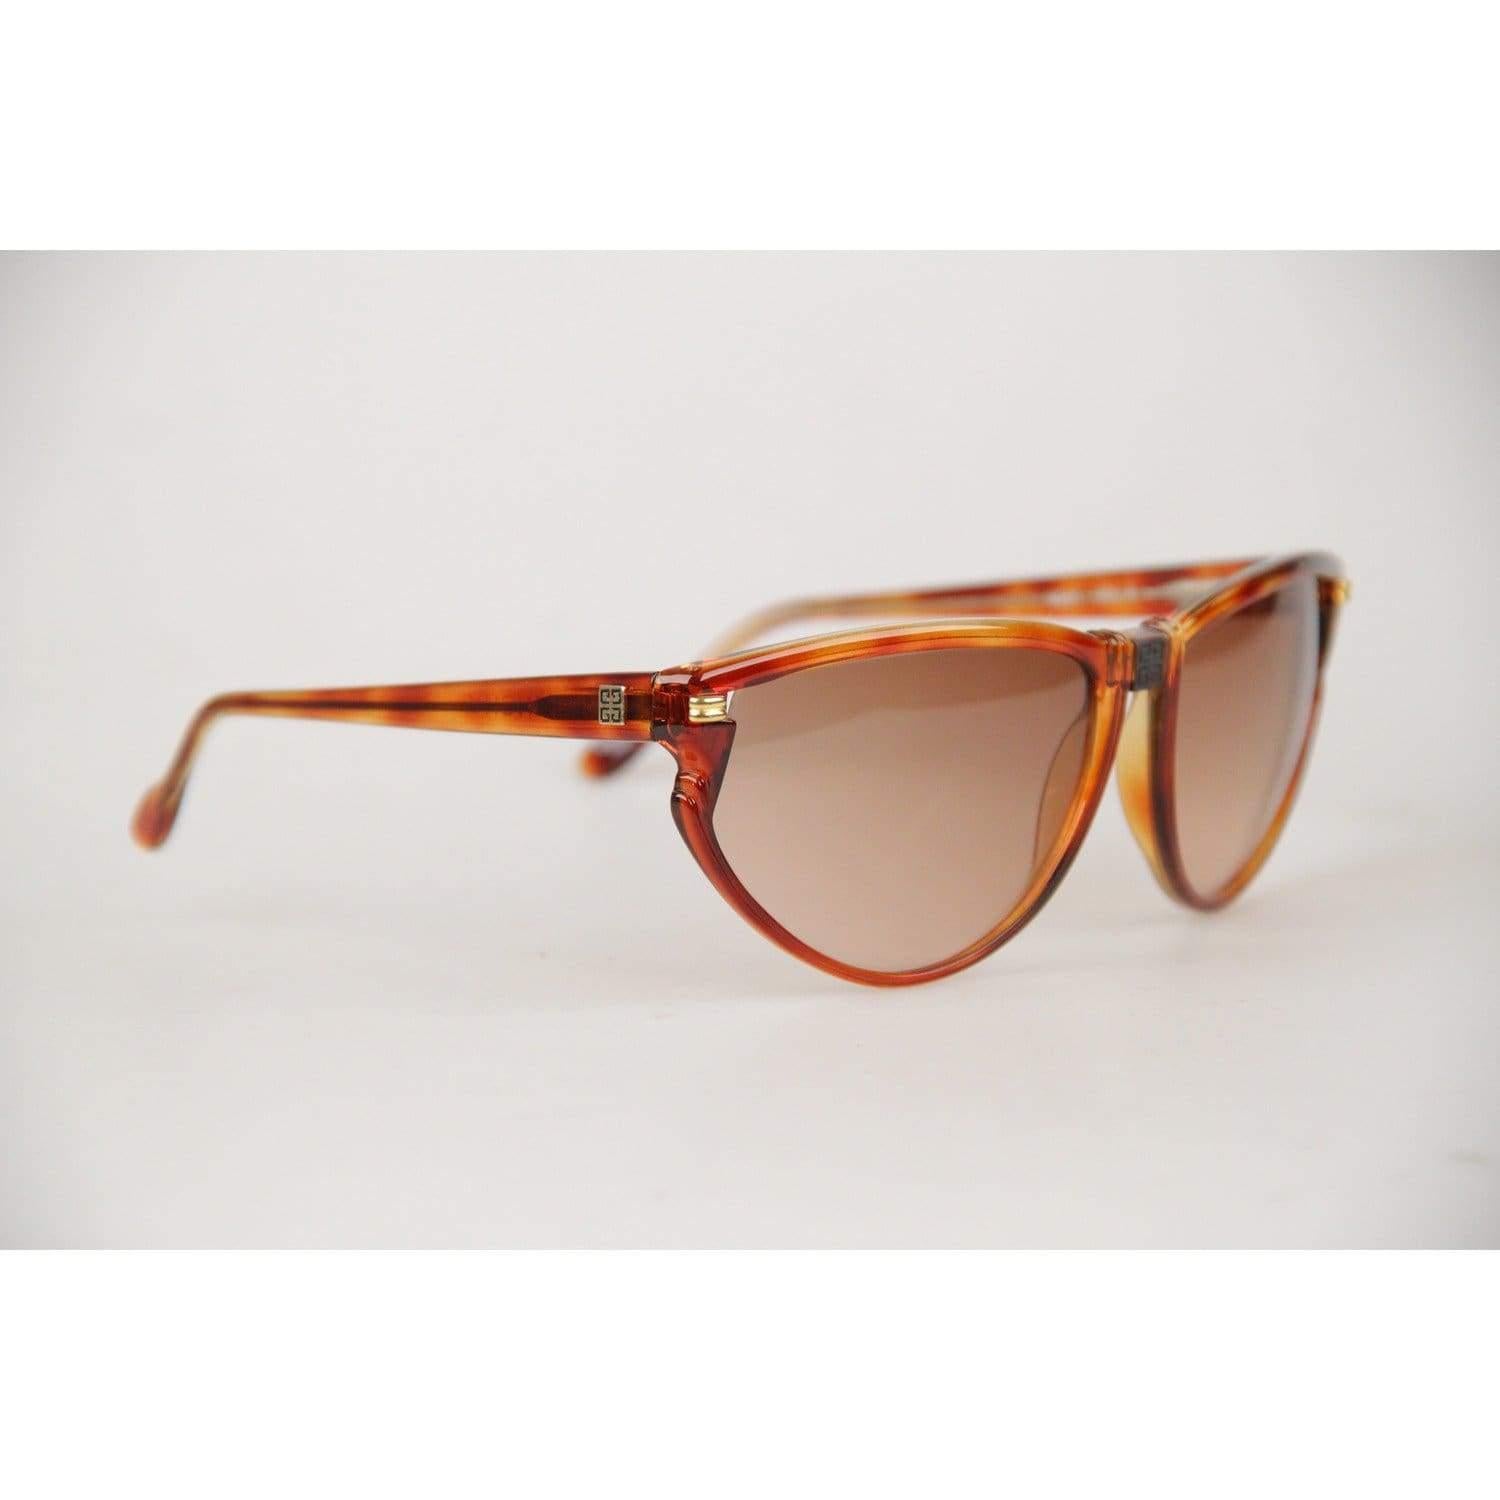 Givenchy Paris Vintage Brown Women Sunglasses mod SG01 COL 02 In Excellent Condition For Sale In Rome, Rome